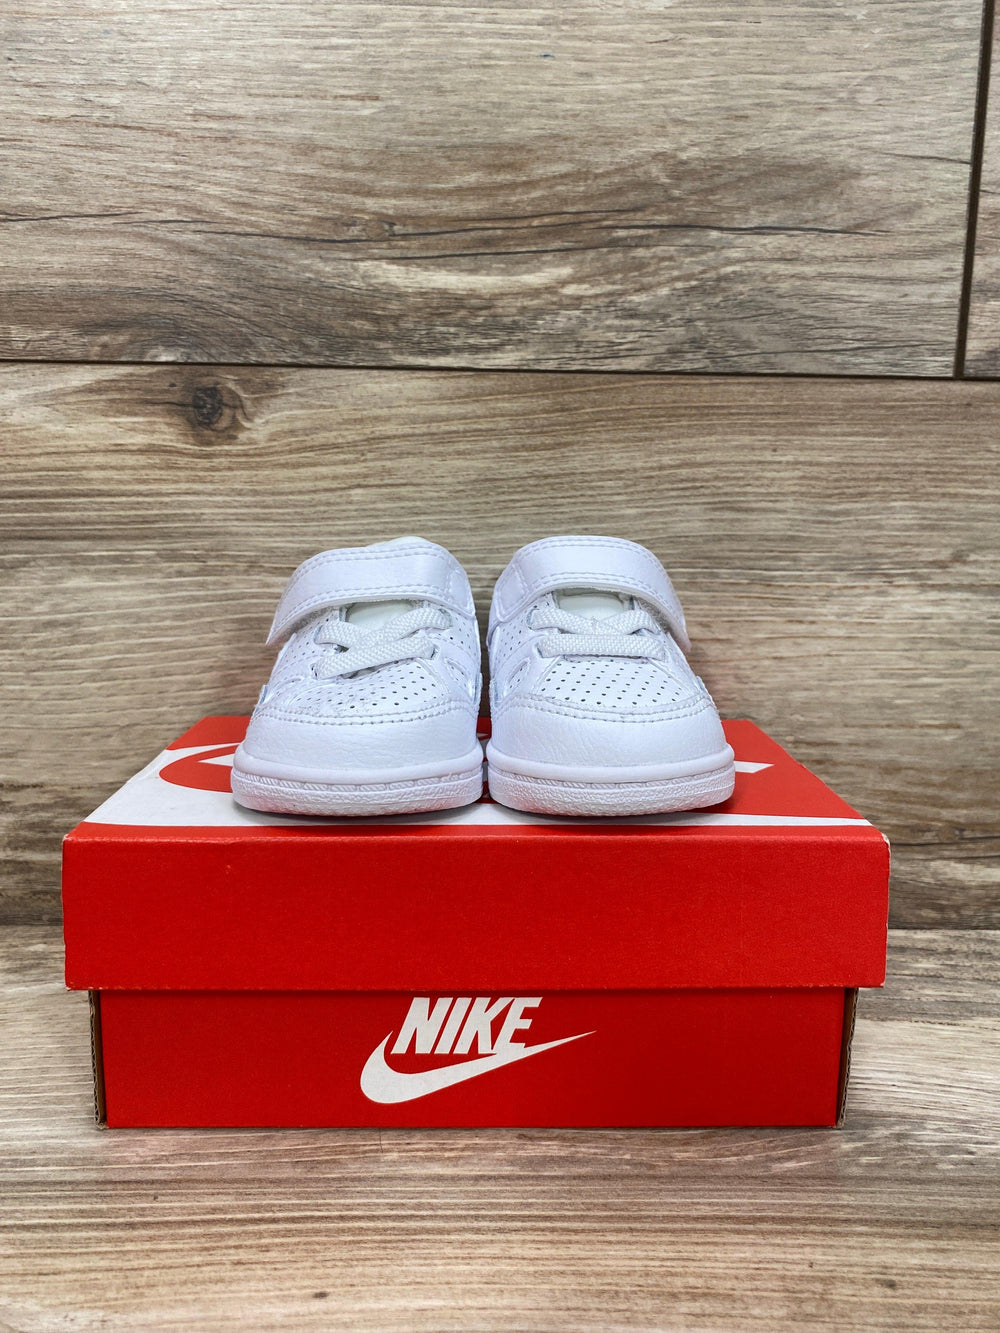 NEW Nike White Son Of Force Sneakers sz 2c - Me 'n Mommy To Be